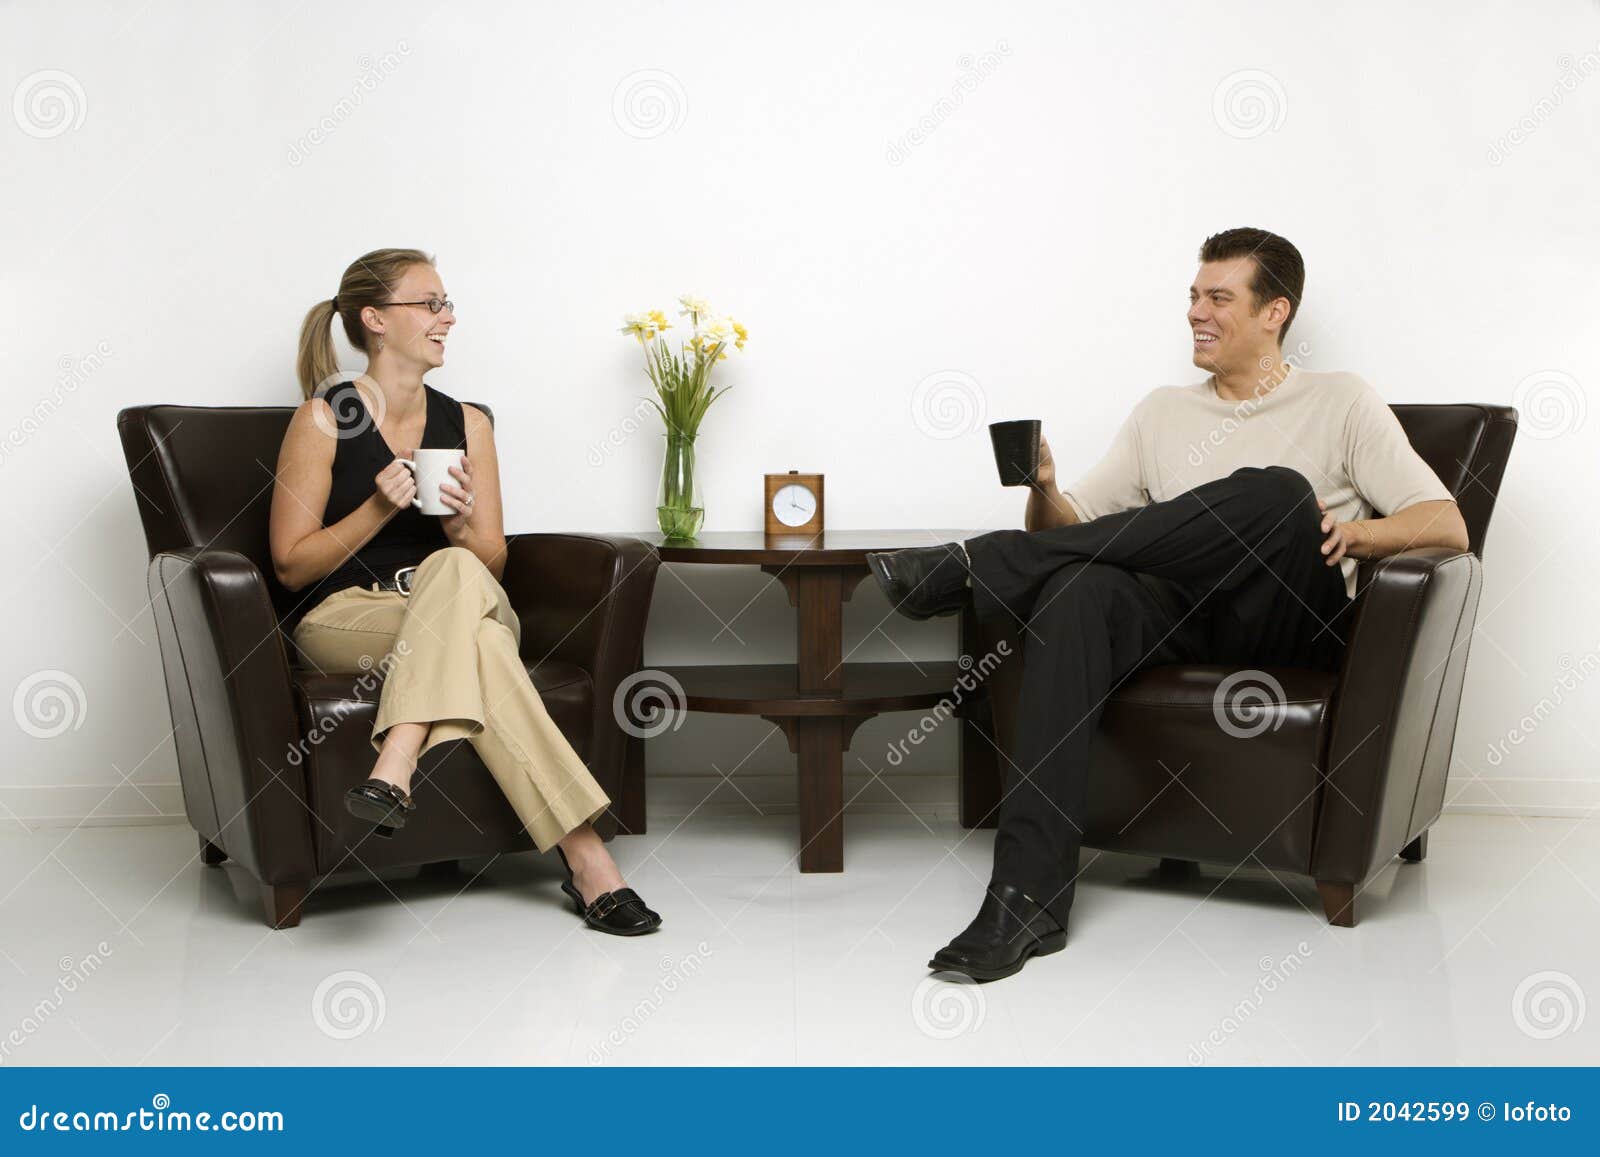 man and woman sitting drinking coffee.